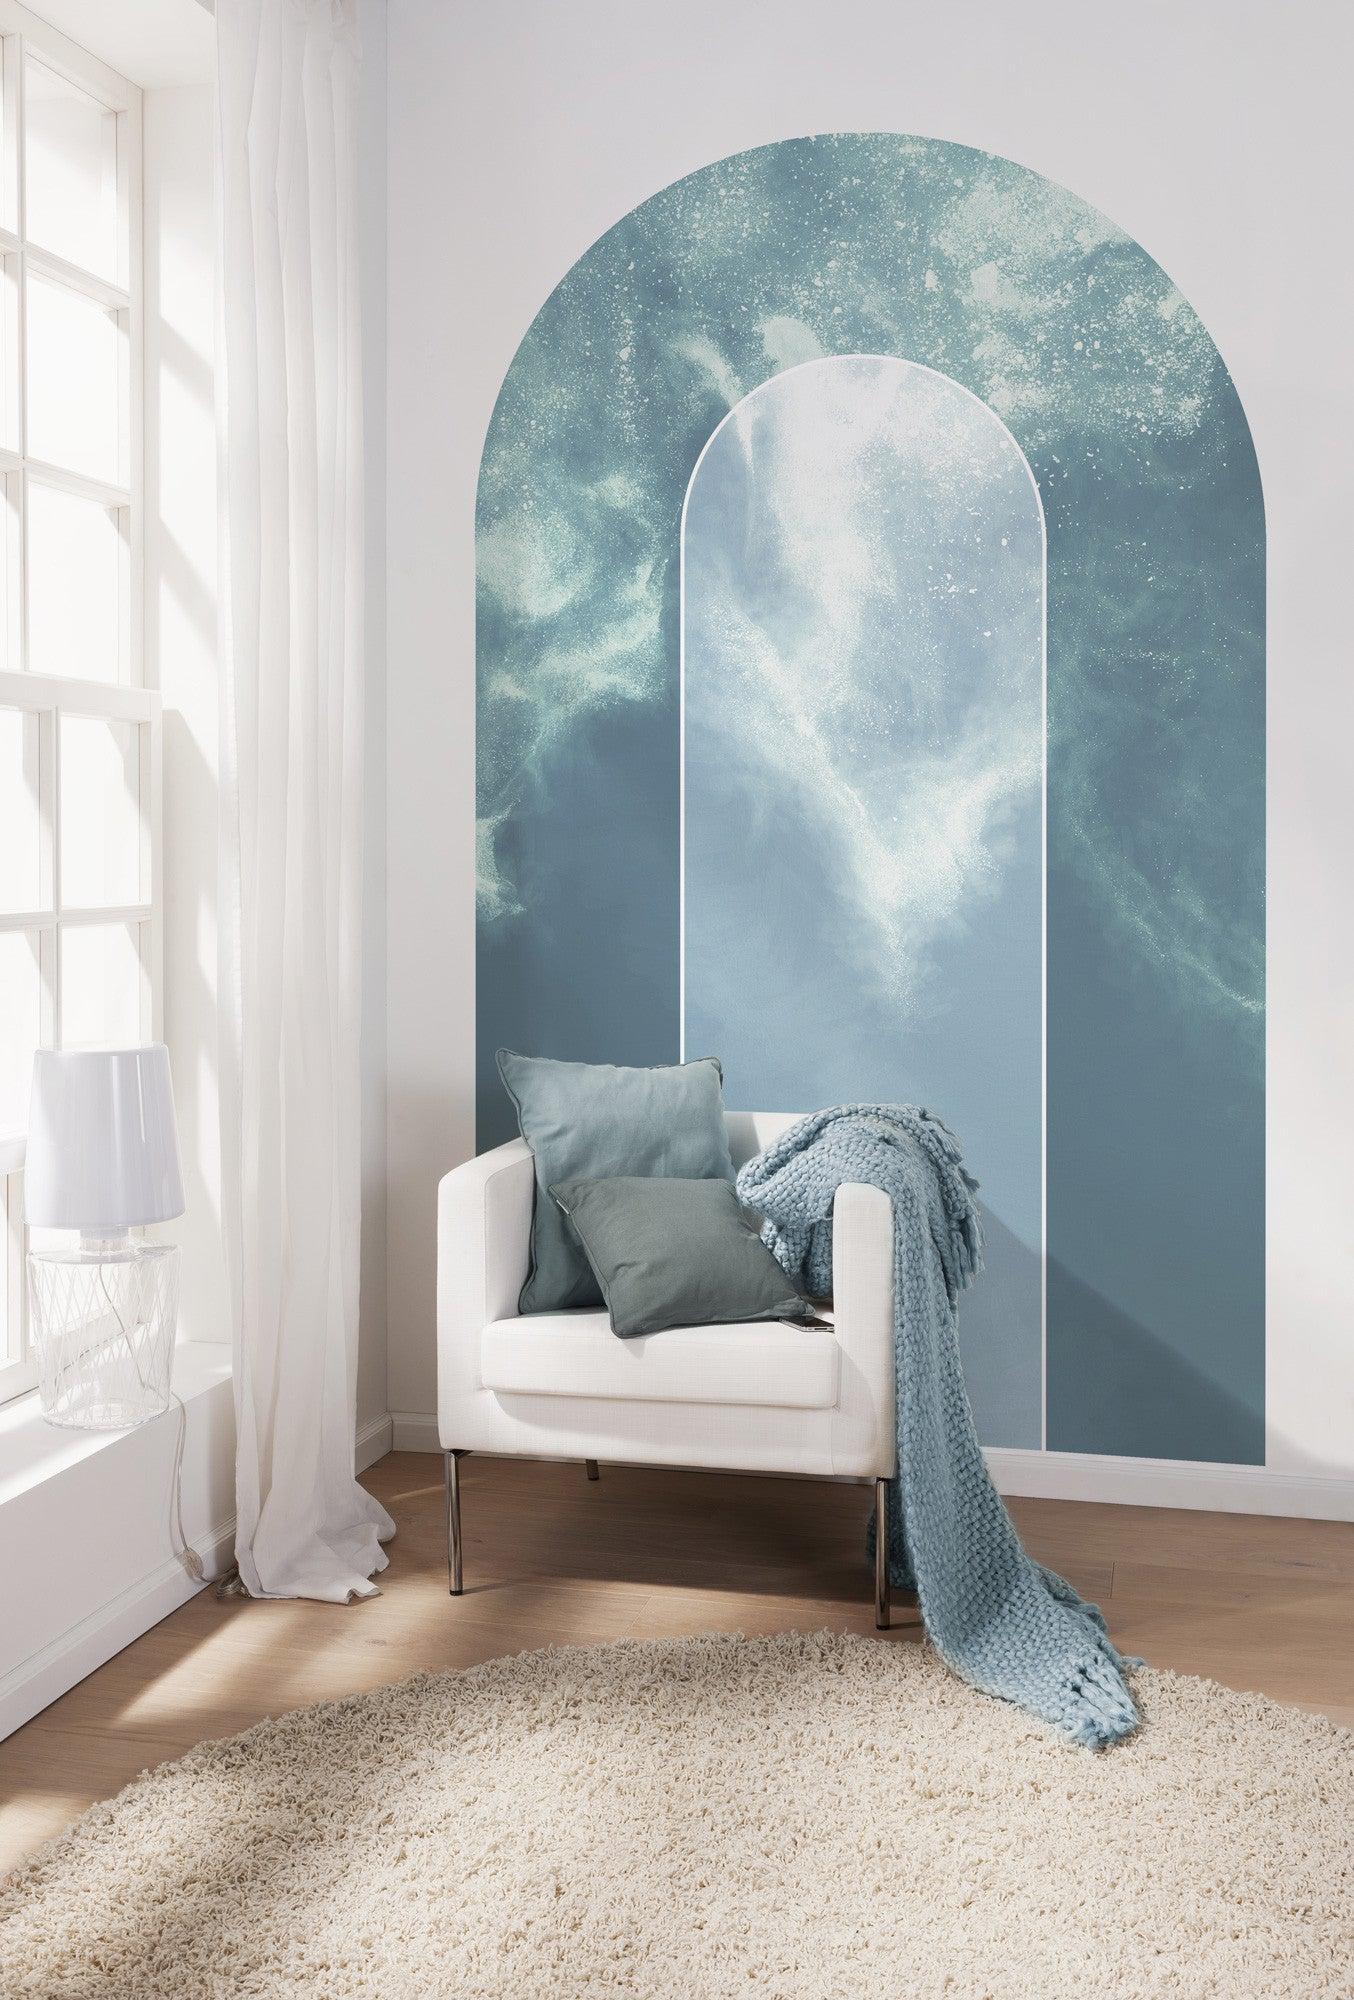 Waves in Maldives Mural Wallpaper-Wall Decor-ABSTRACT WALLPAPERS, ART WALLPAPER, ECO MURALS, MURALS, MURALS / WALLPAPERS, NON-WOVEN WALLPAPER, TROPICAL WALLPAPERS-Forest Homes-Nature inspired decor-Nature decor